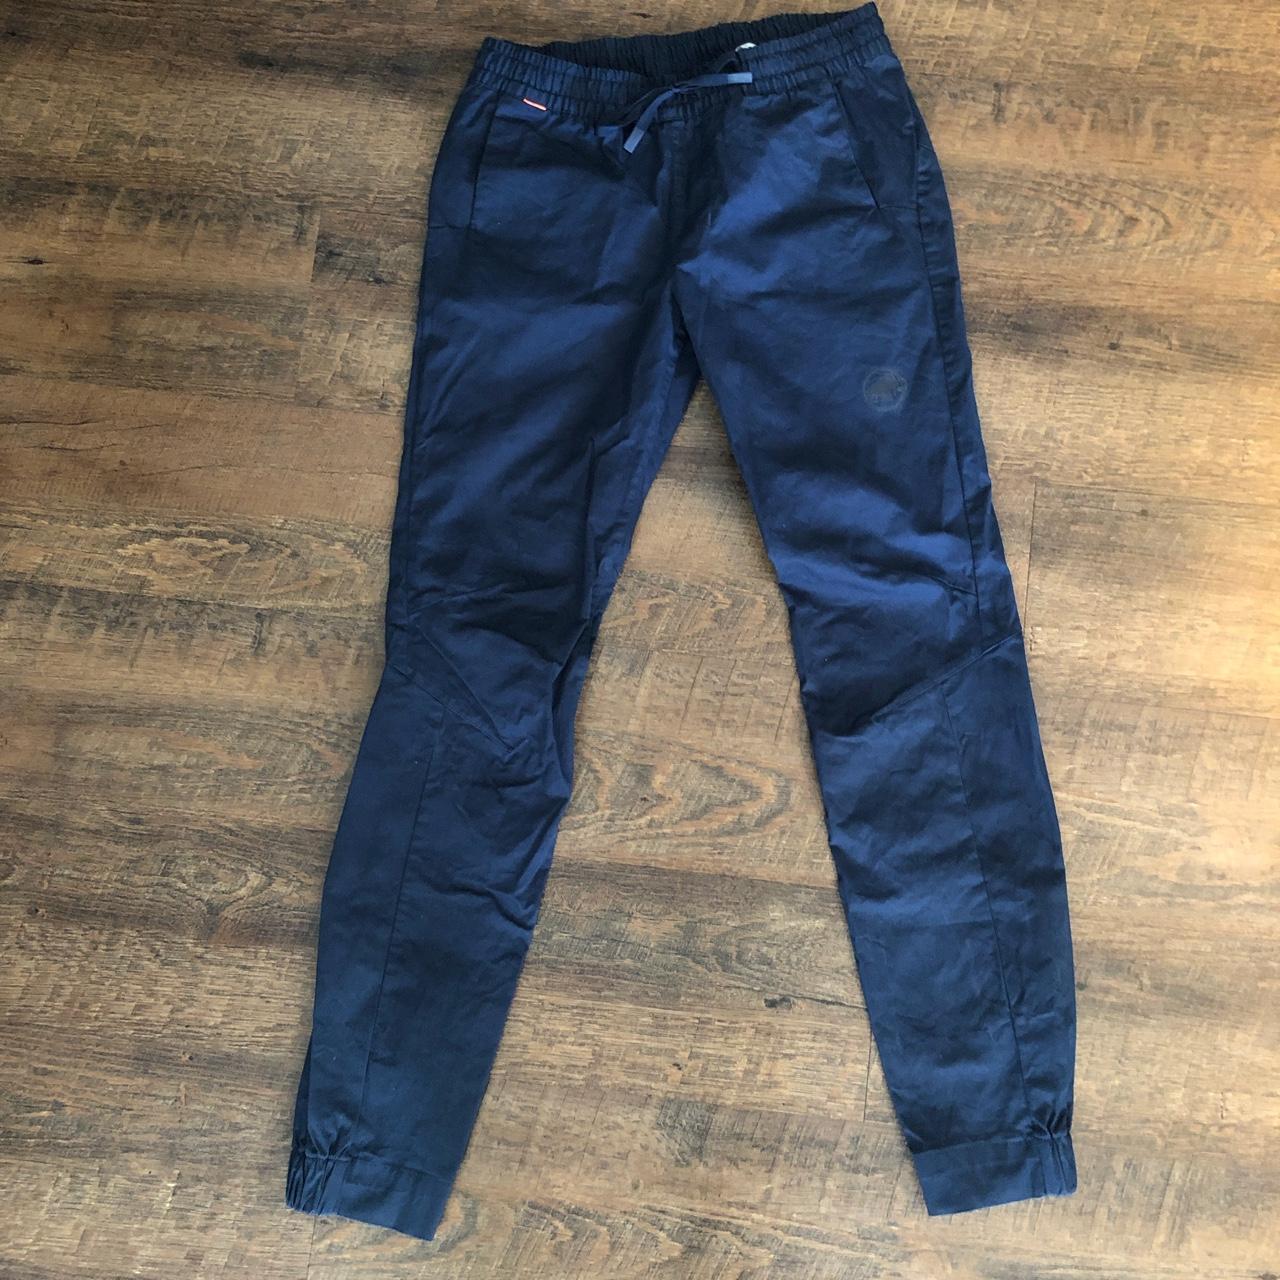 Mammut Camie tapered climbing pants with drawstring,... - Depop